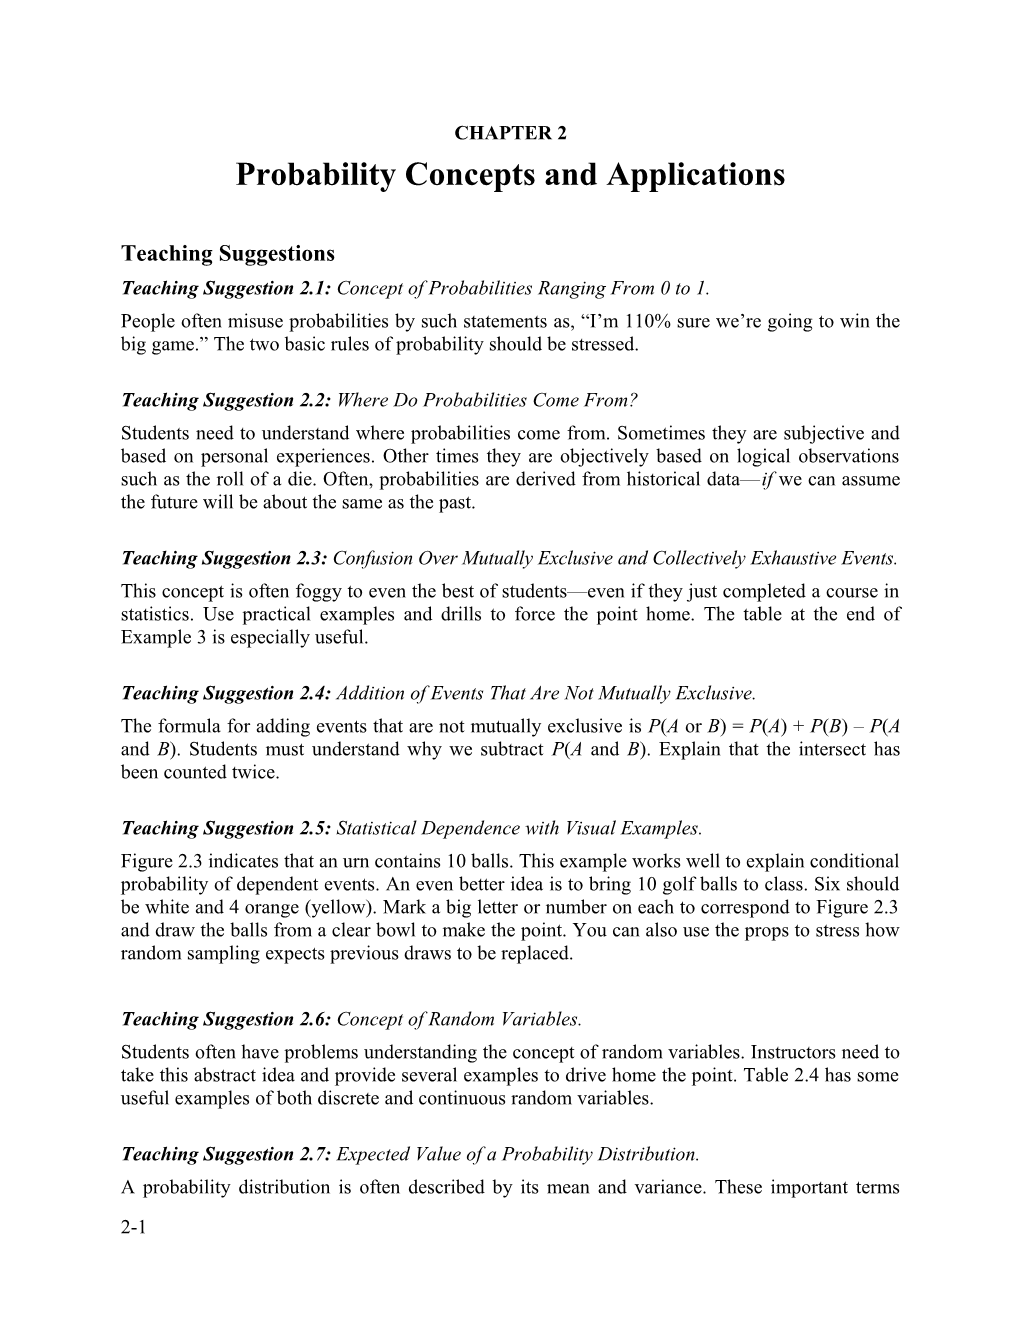 Probability Concepts and Applications